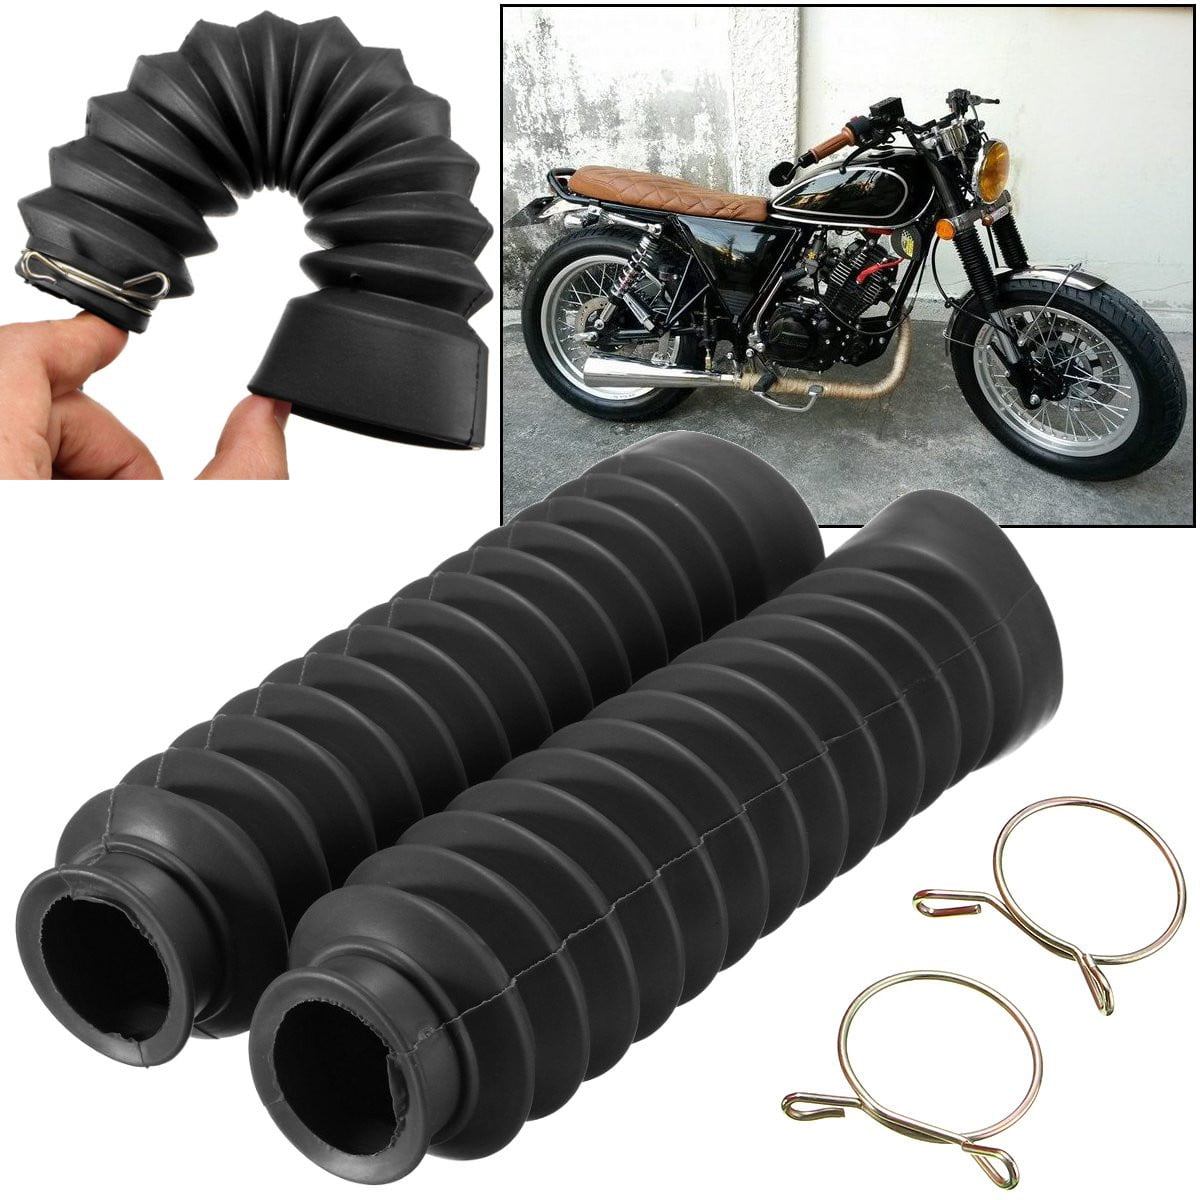 2Pcs Offroad Motorcycle Fork Anti Dust Covers Gaiters Boots Shock Black Rubber